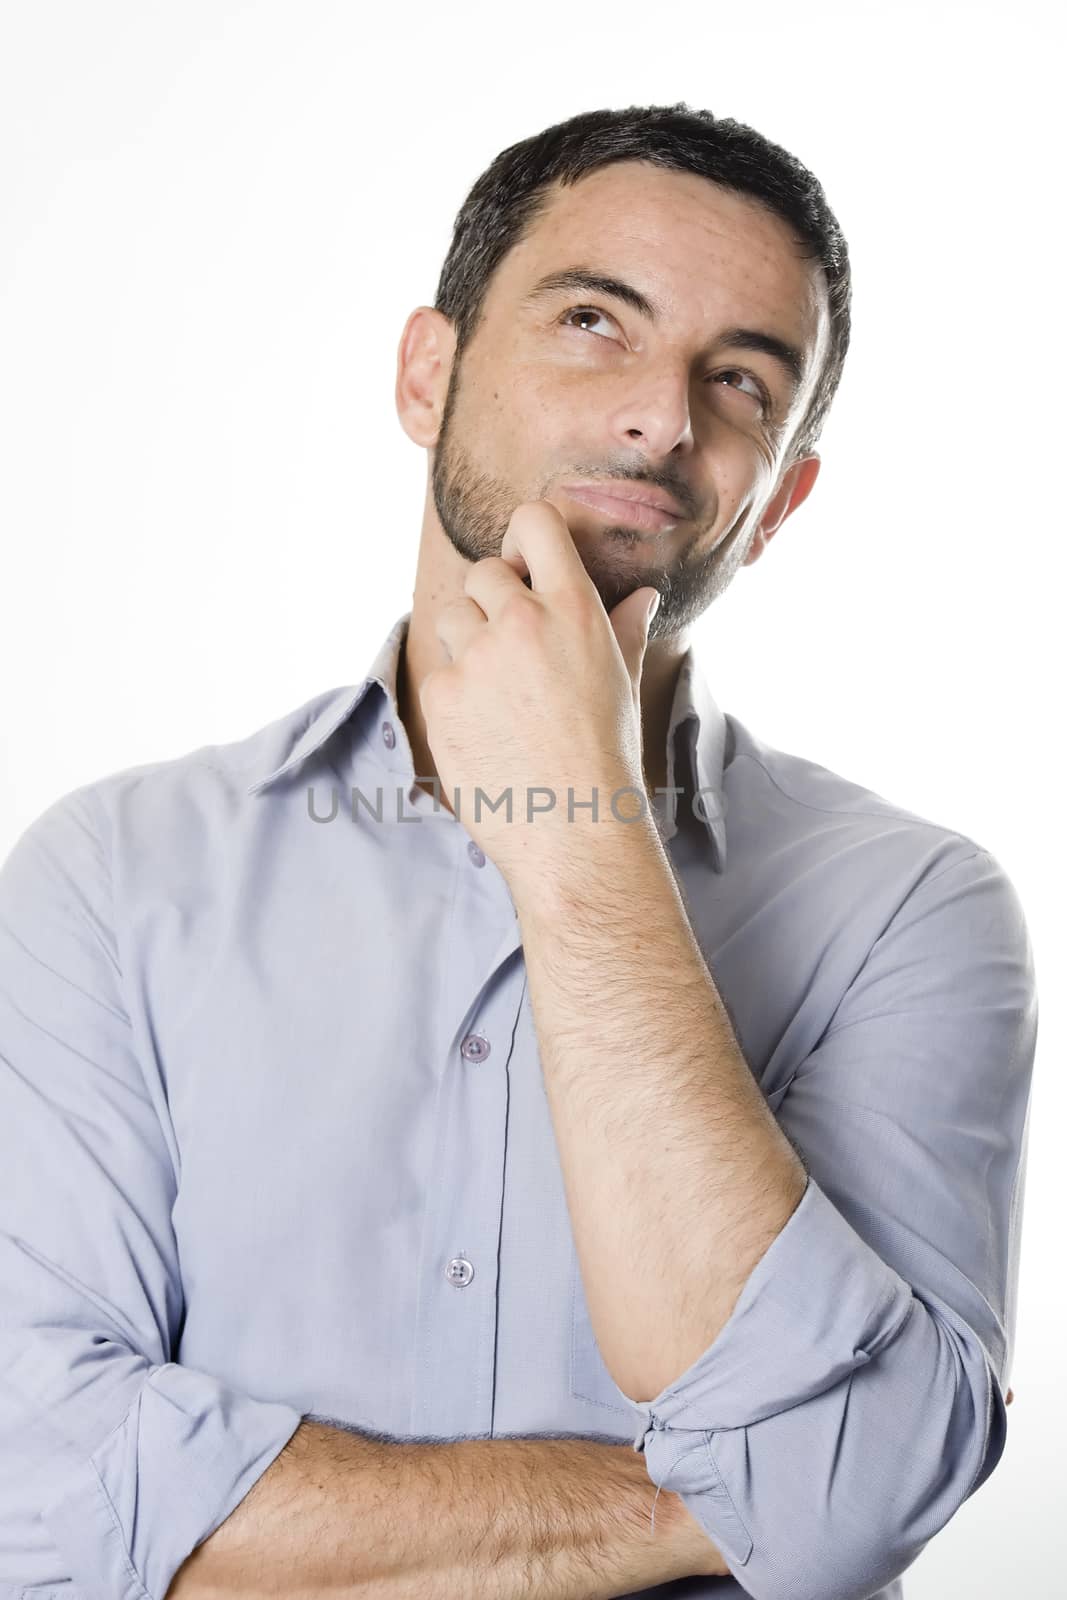 Caucasian Young Man with Beard Thinking Doubting and Considering a Decision Isolated in White Background